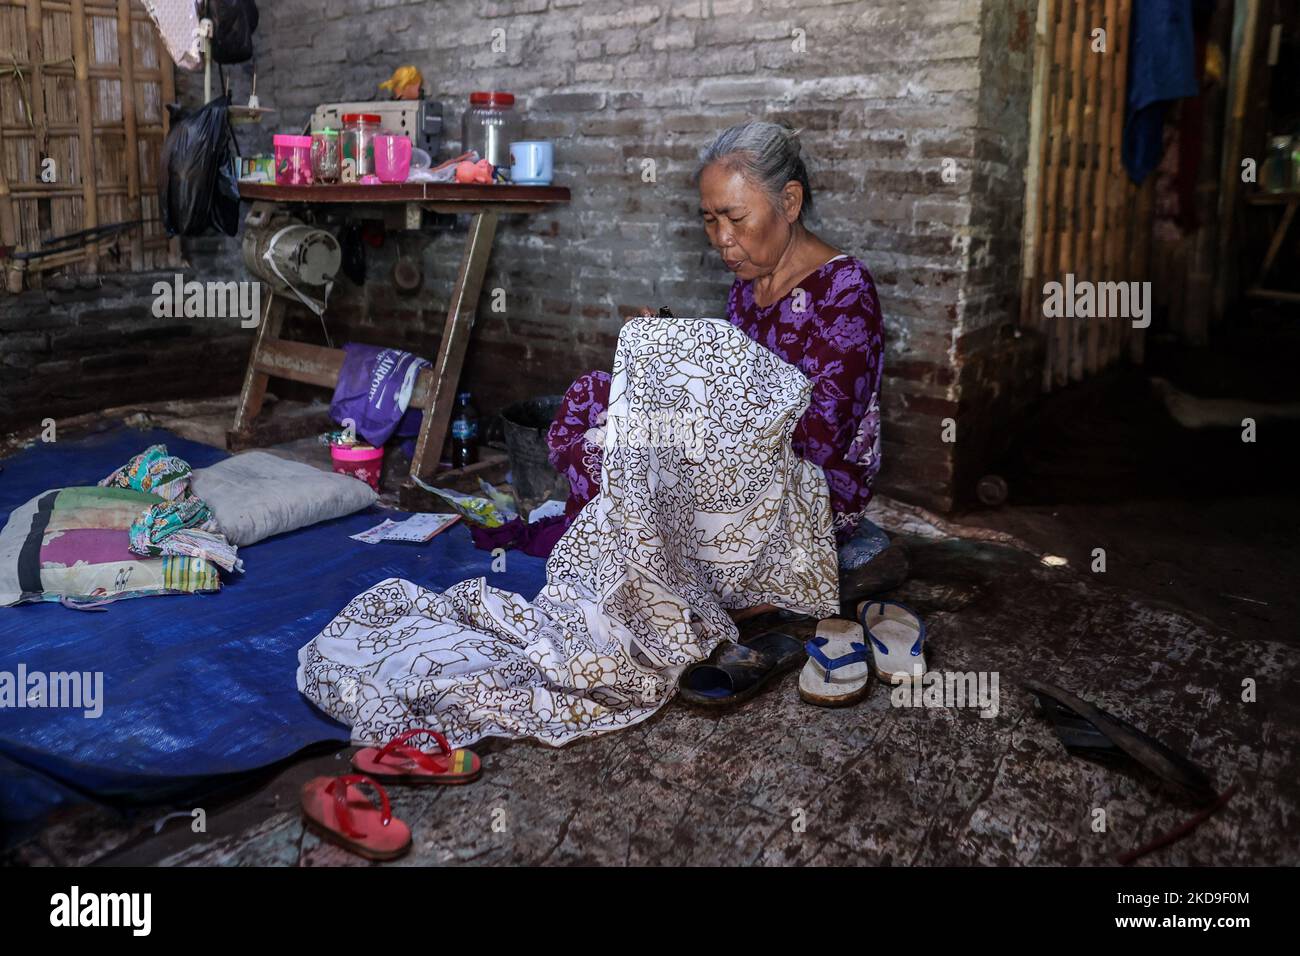 A batik craftswoman applies melted wax using a spouted tool called a canting as make traditional Javanese textile called batik at low-lying Jeruk Sari neighborhood in coastal Pekalongan, Central Java, Indonesia, June 5, 2021. An area in which almost every available space is used for batik production, with a high level of poverty, vulnerable to both rising sea levels and high river peak flows. Pekalongan is a city known for batik, a traditional Indonesian method of using wax to resist water-based dyes to depict patterns and drawings, usually on fabric. This textile has traditionally been crafte Stock Photo